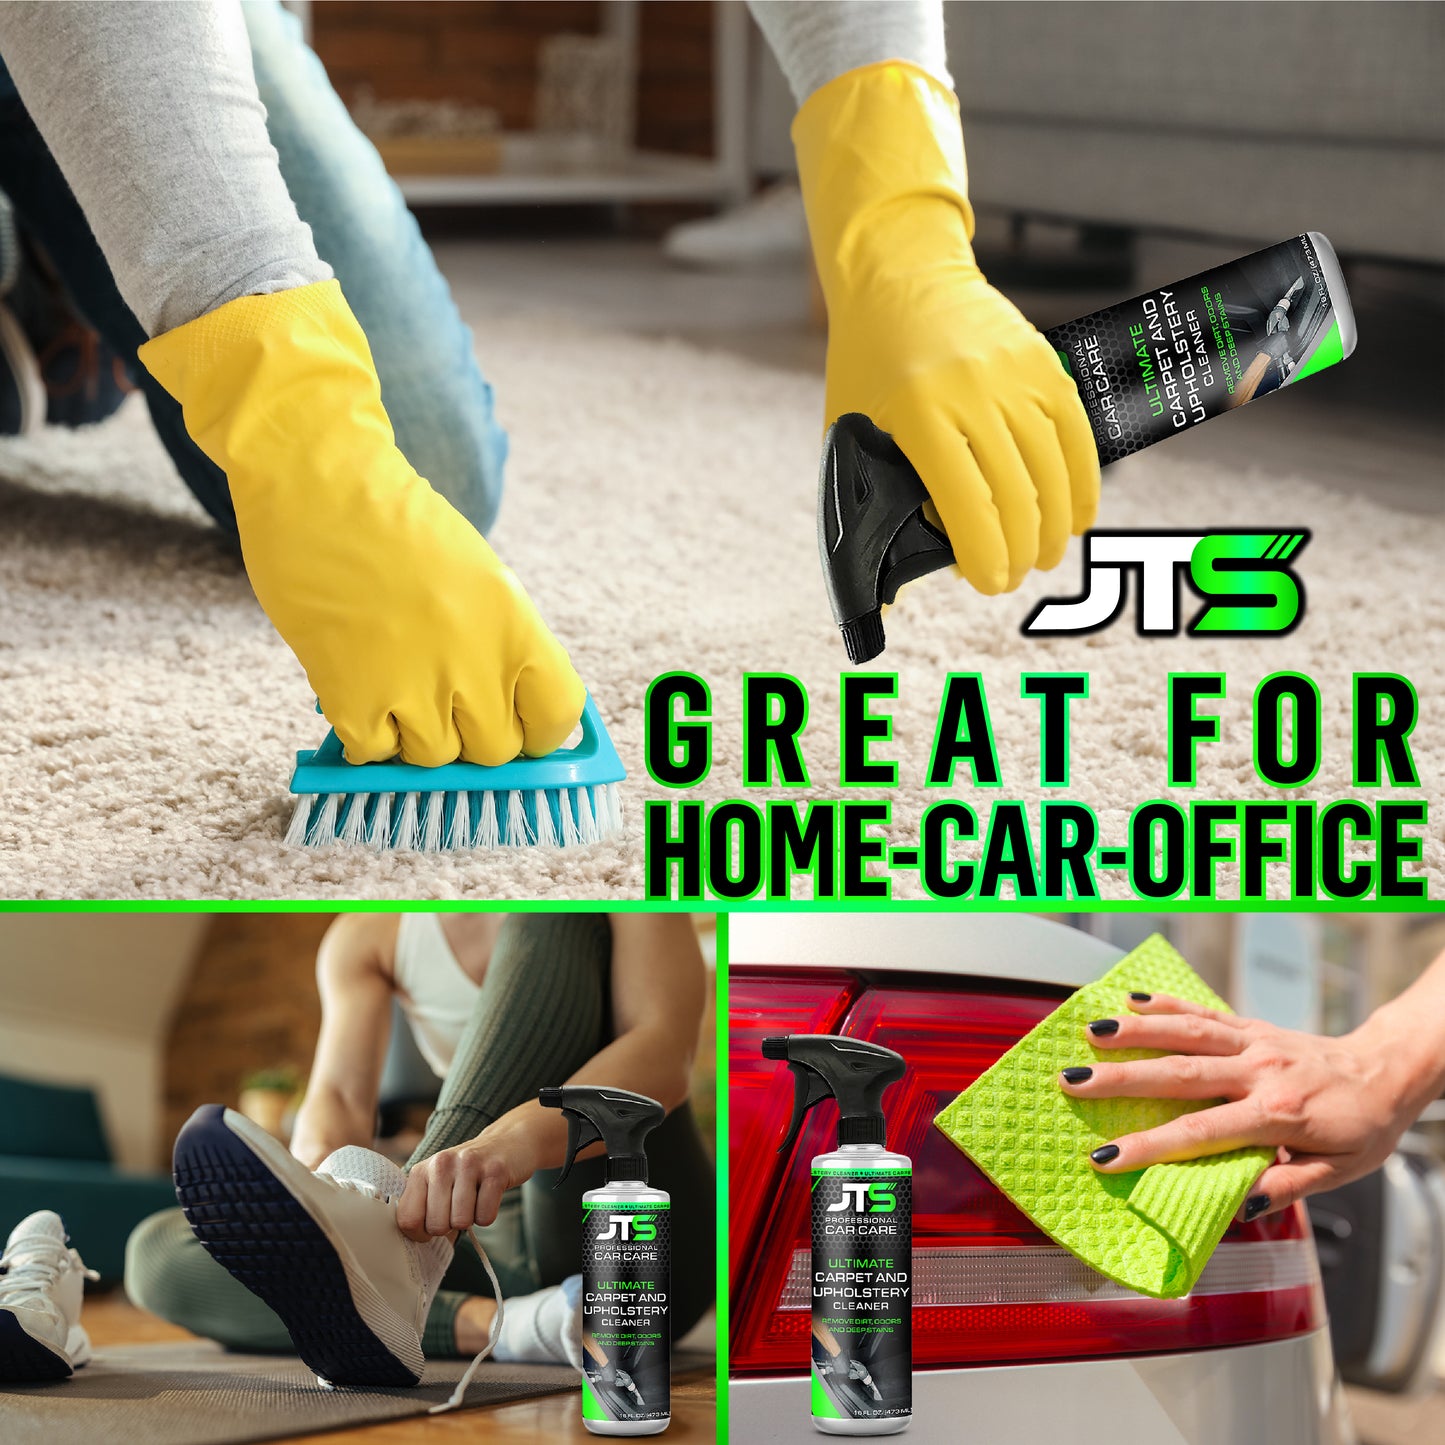 The Most Amazing At Home Upholstery Cleaner - J. Cathell